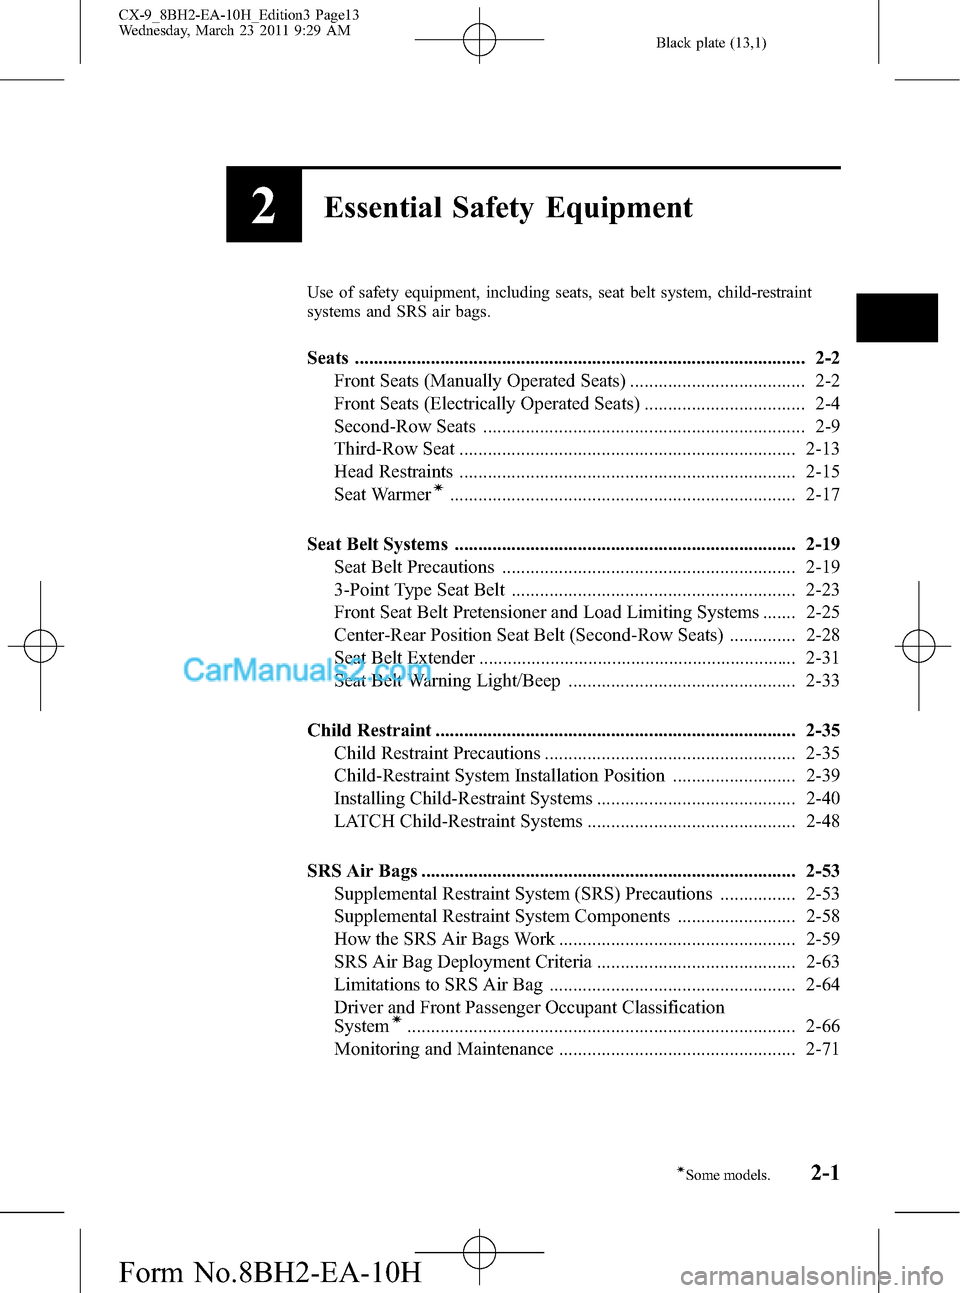 MAZDA MODEL CX-9 2011  Owners Manual (in English) Black plate (13,1)
2Essential Safety Equipment
Use of safety equipment, including seats, seat belt system, child-restraint
systems and SRS air bags.
Seats .............................................